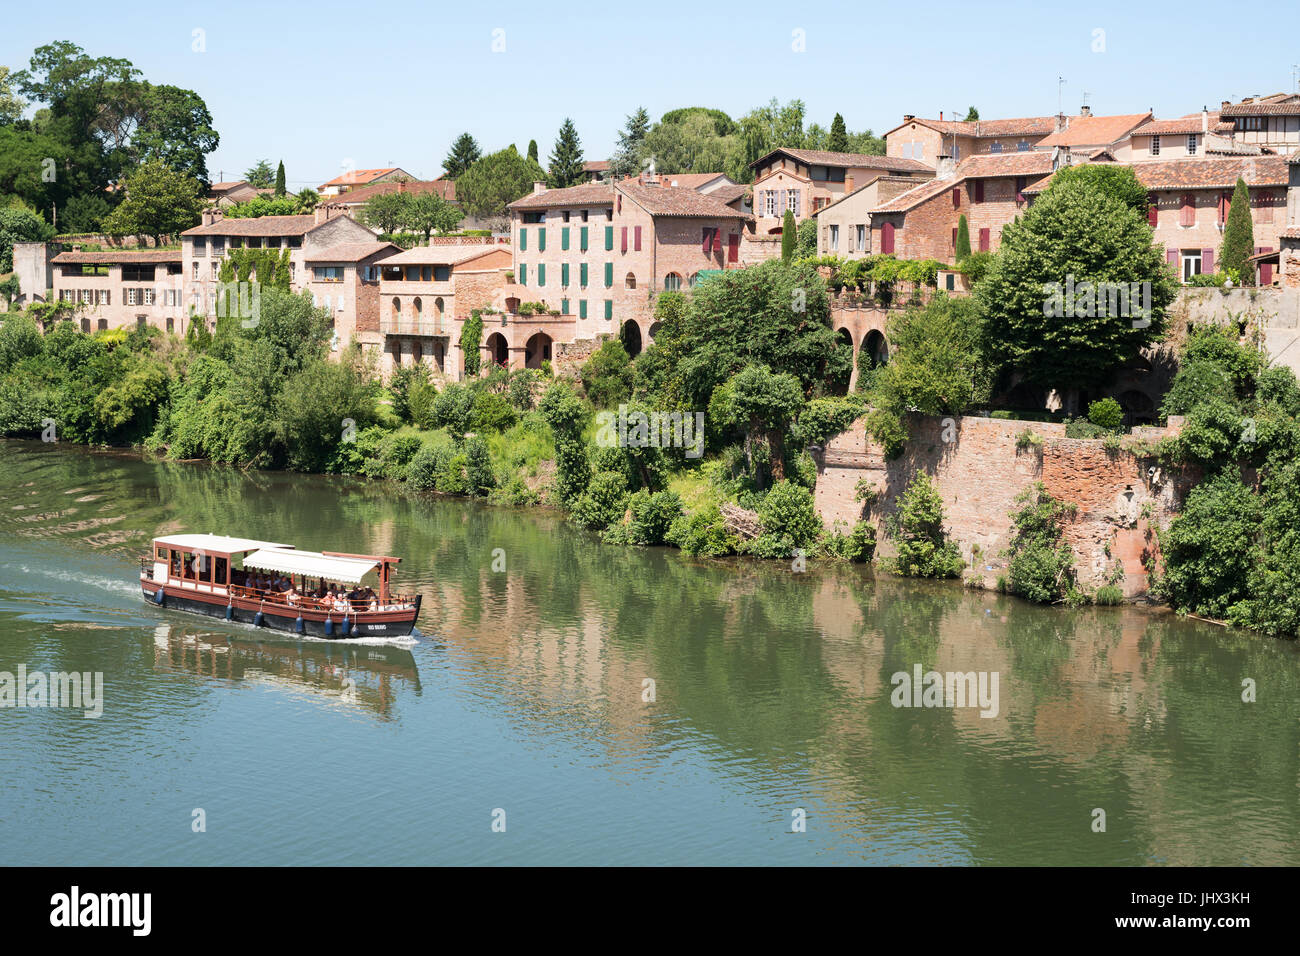 Tourists taking a cruise on the river Tarn at Albi, France Stock Photo